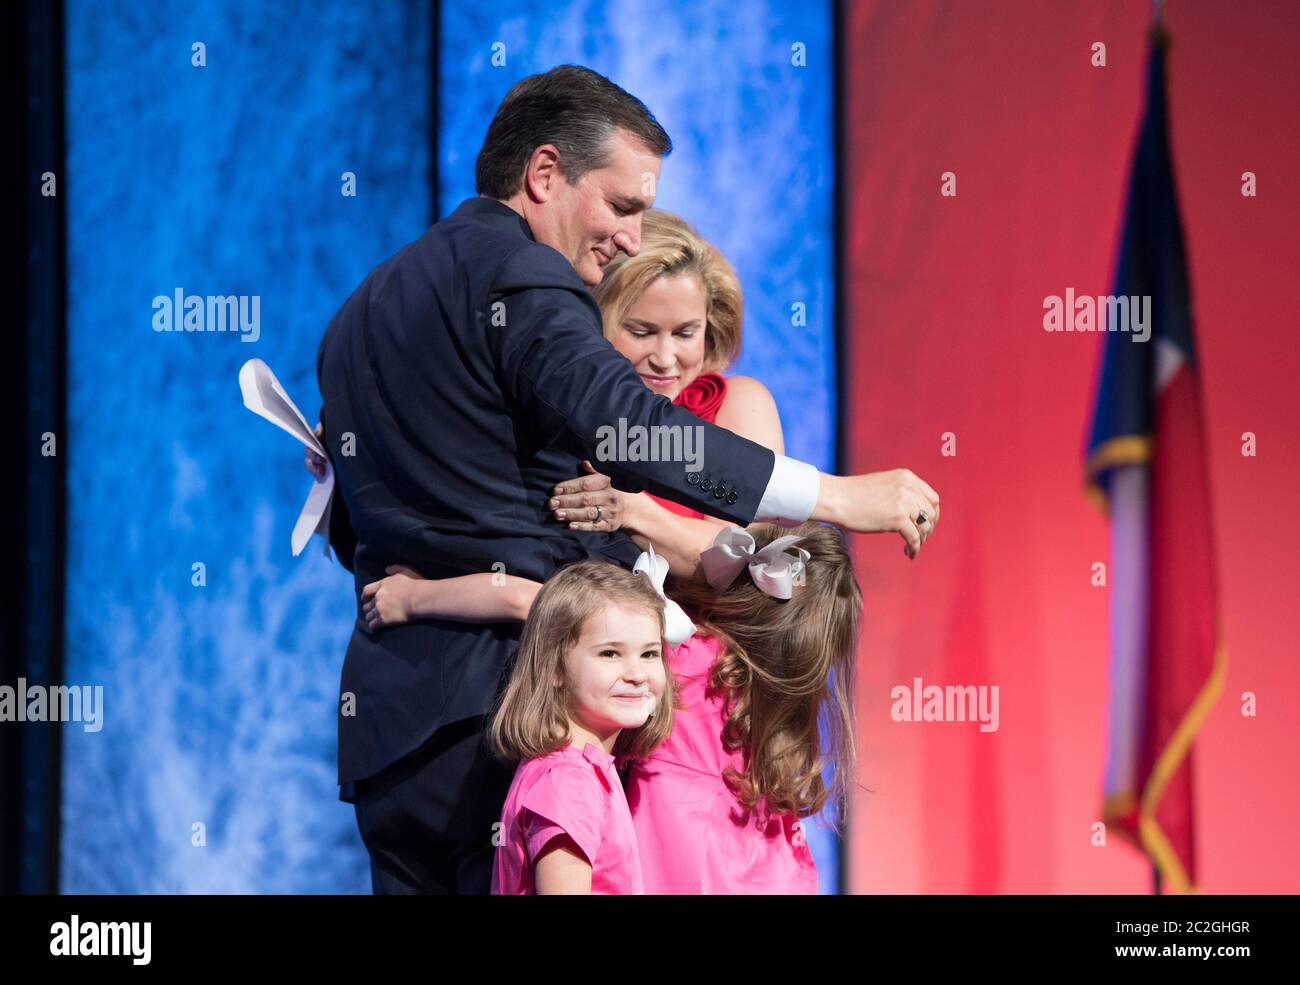 Dallas Texas USA, May 14 2016: U.S. Senator Ted Cruz of Texas hugs his wife and young daughters as they join him onstage at the Republican Party of Texas Convention. ©Bob Daemmrich Stock Photo